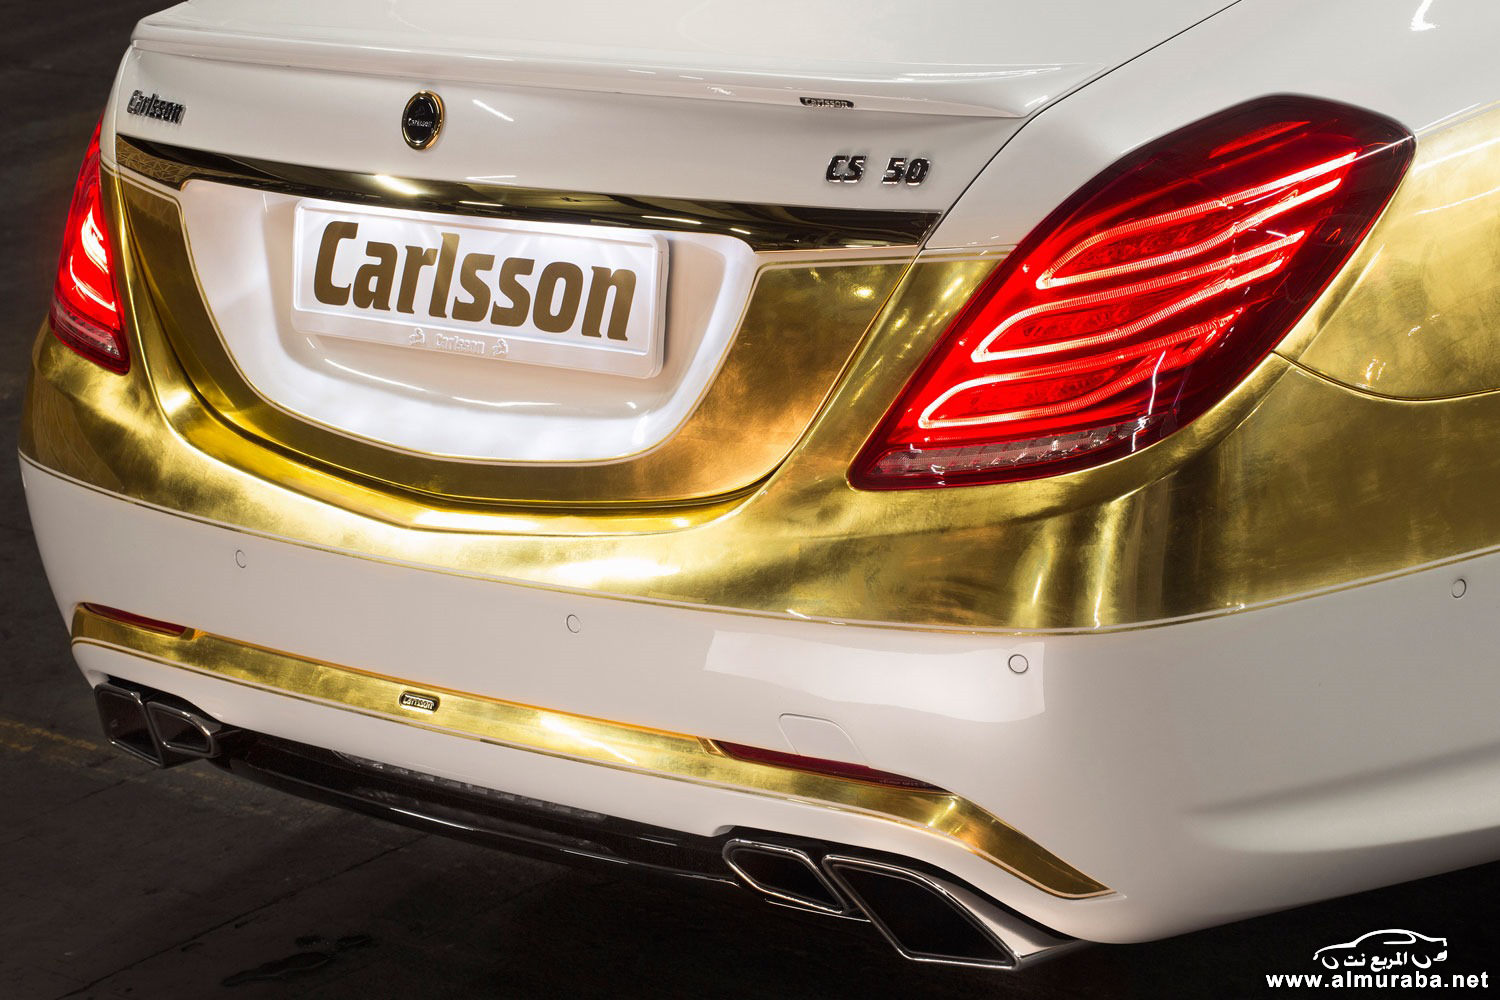 mercedes-s-class-gets-trimmed-in-real-gold-by-carlsson-photo-gallery_10